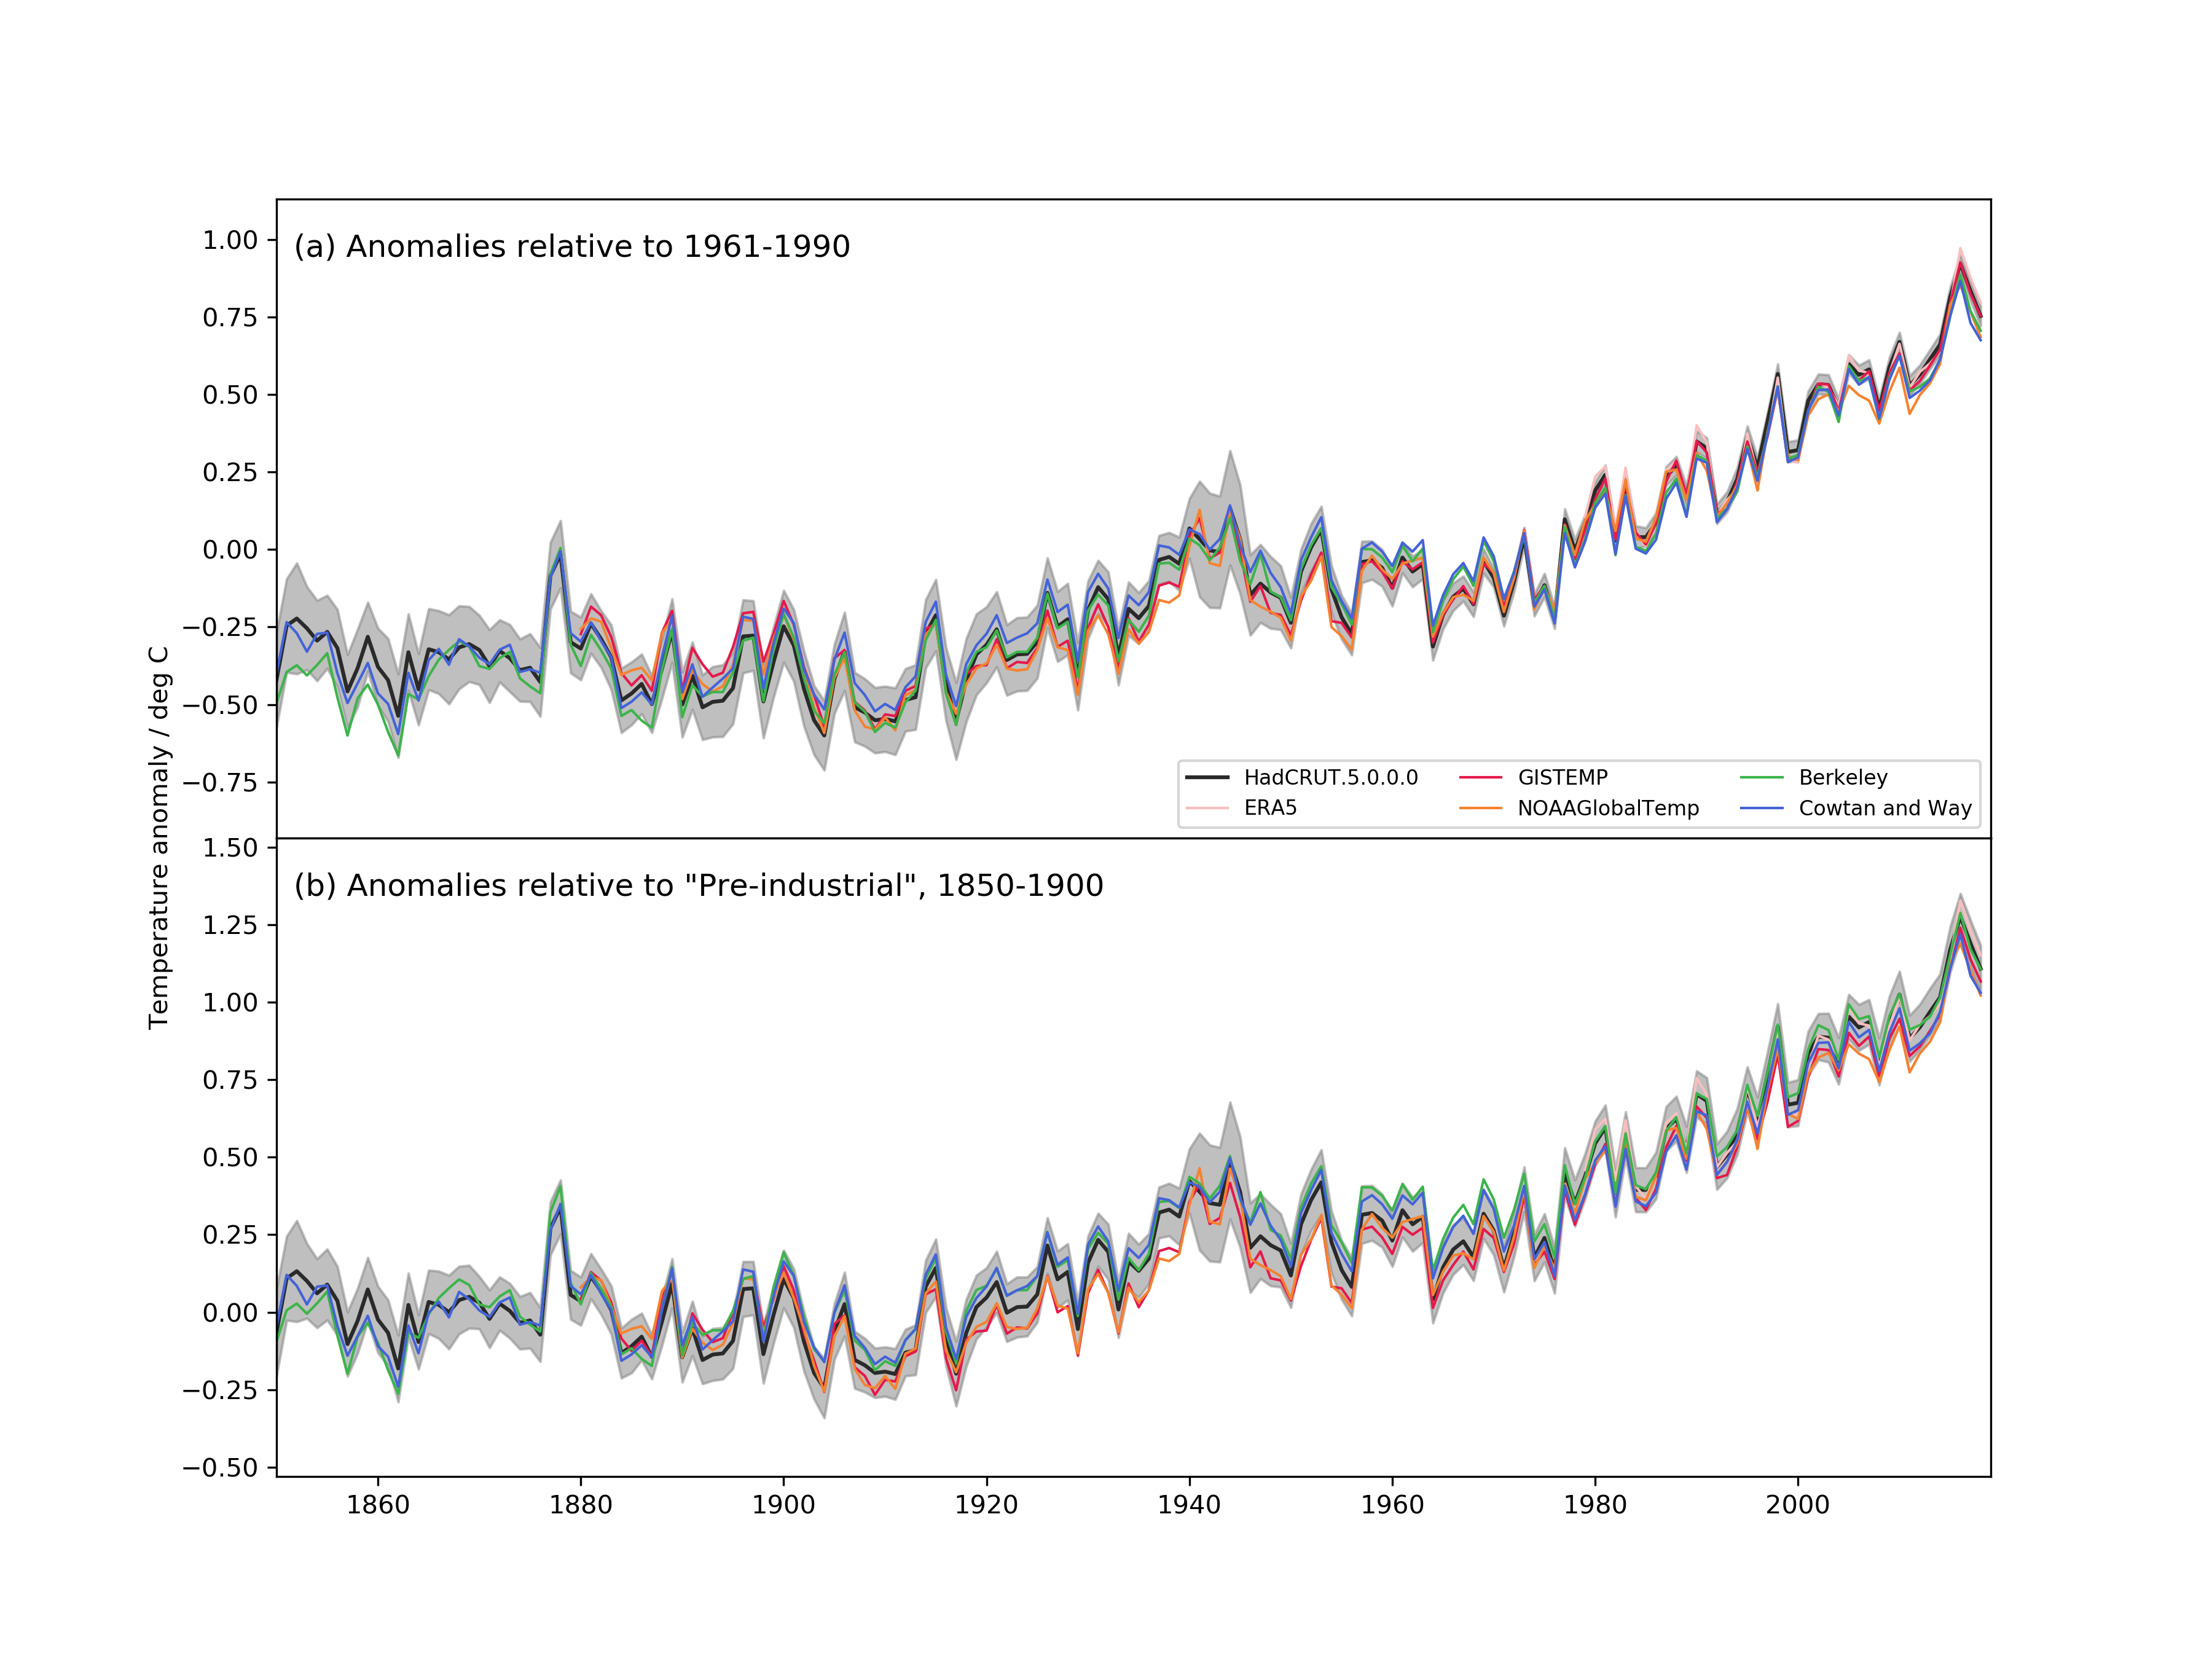 Global annual mean temperature from 1850 to 2018 for HadCRUT5 and a range of other data sets relative to two different baseline periods - 1961-1990 and 1850-1900.